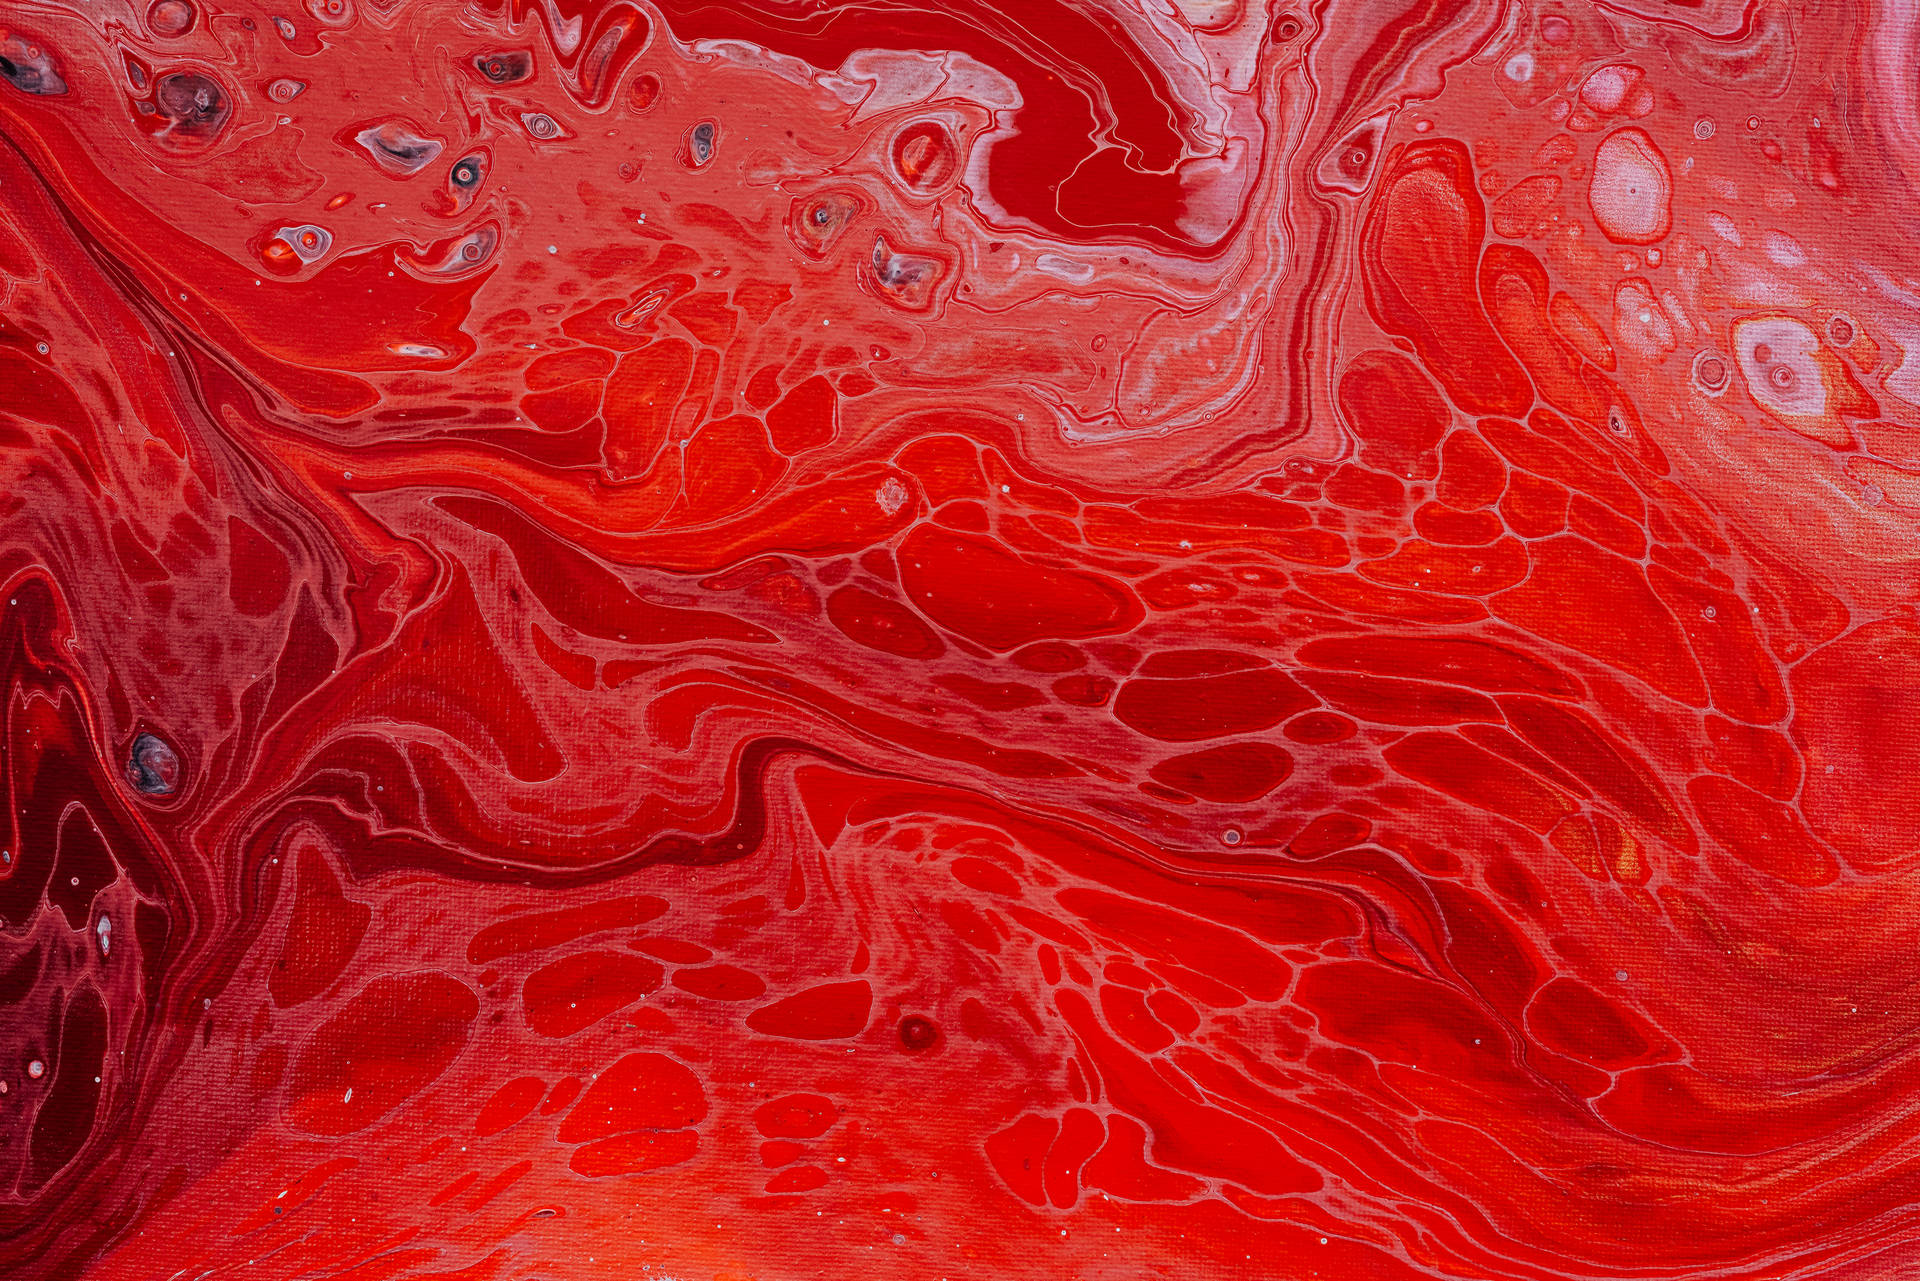 Red Abstract Fluid Painting Wallpaper